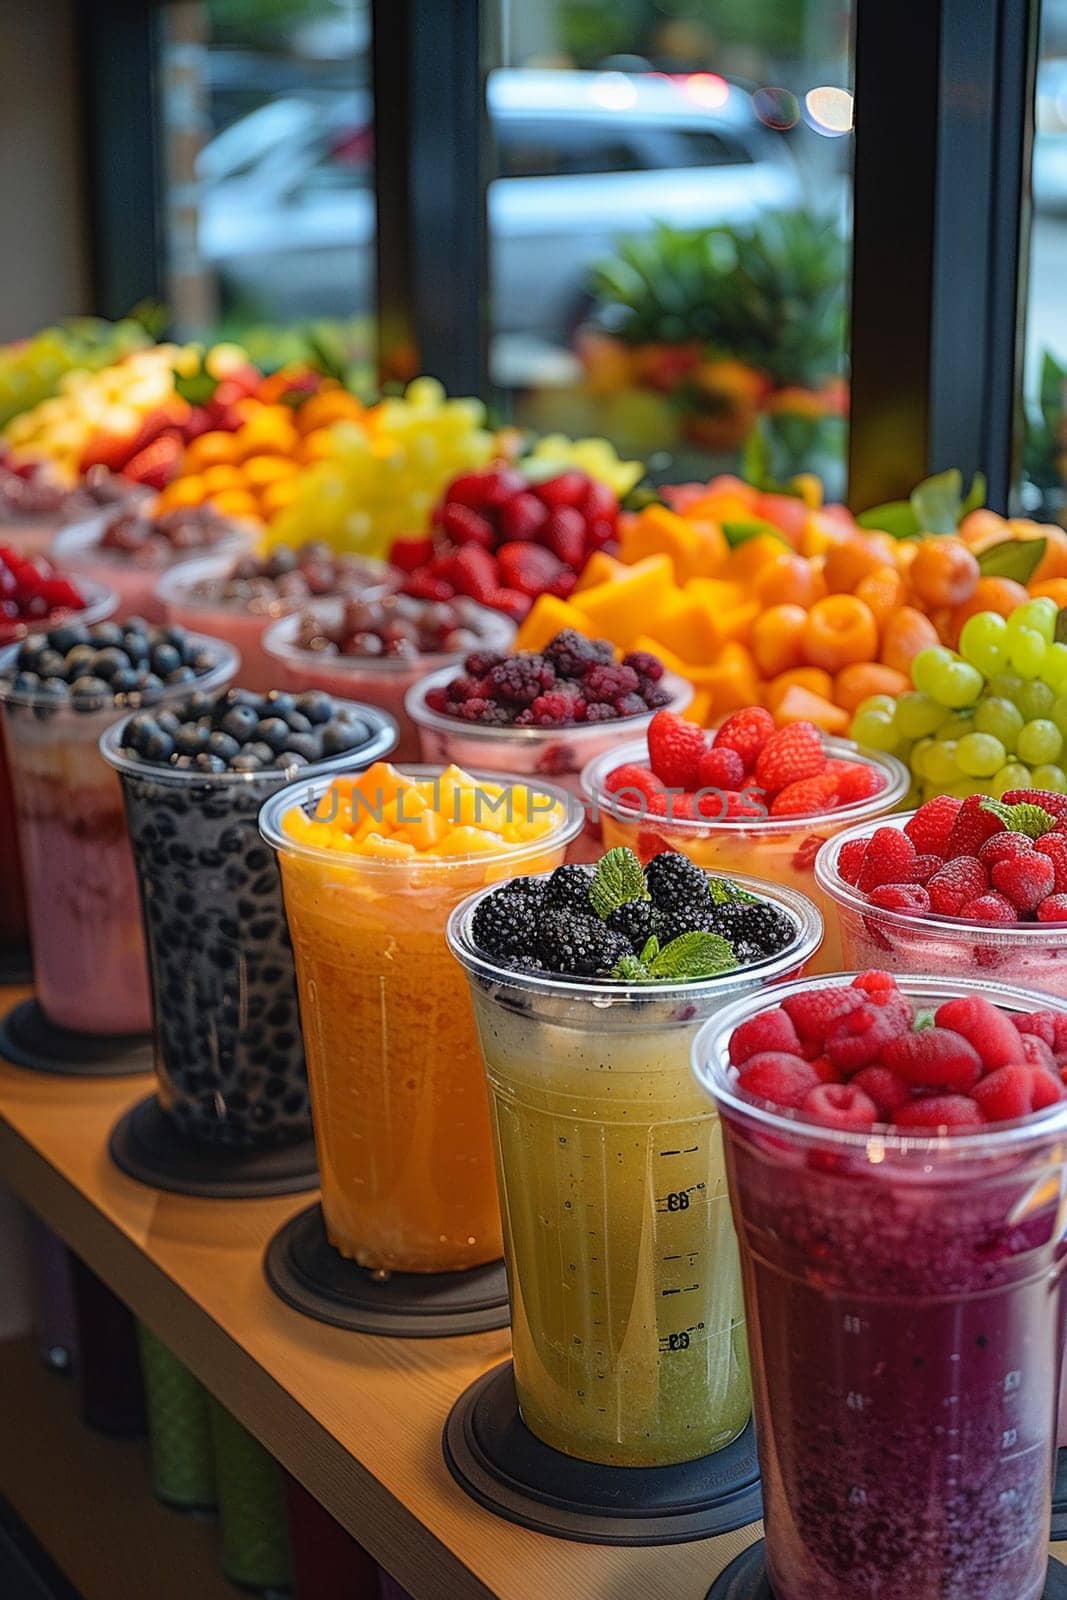 Smoothie Bar Mixes Health with Flavor in Business of Nutritious Snacking, Fruit displays and blenders swirl a story of wellness and taste in the smoothie business.